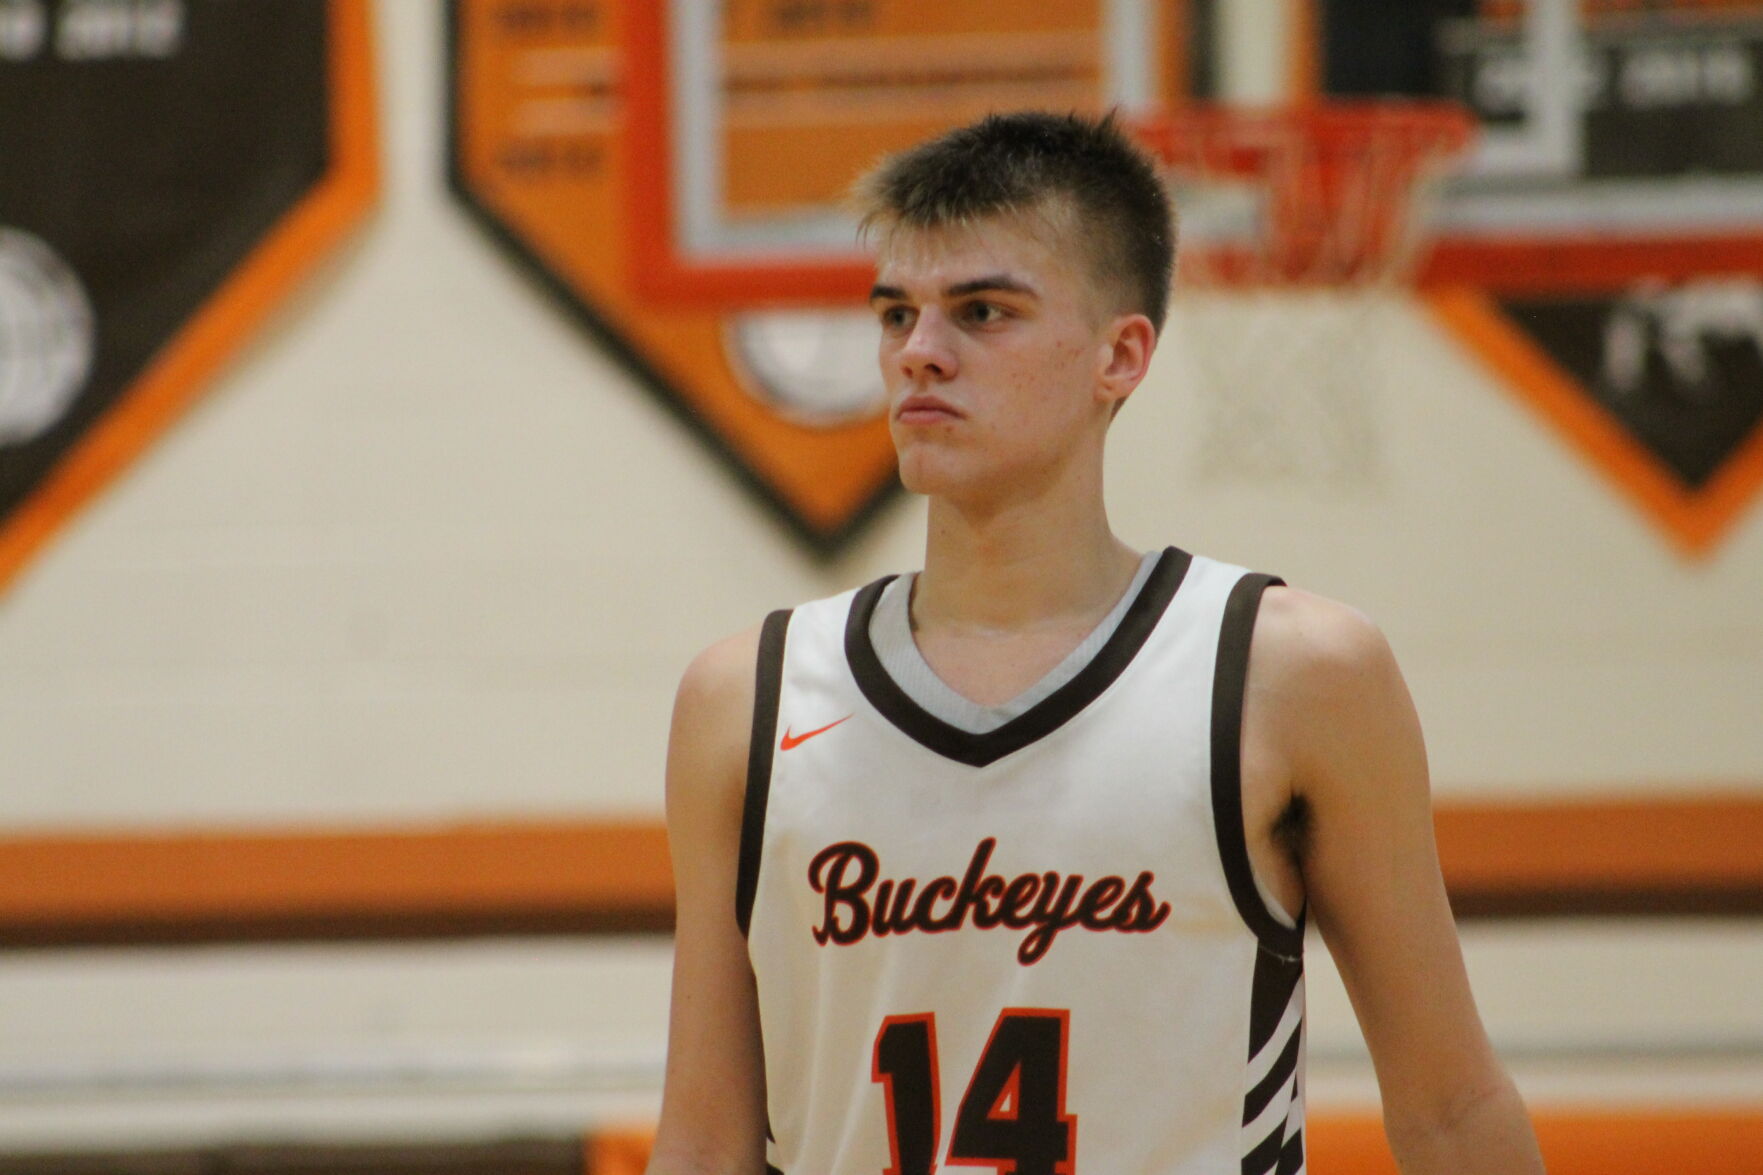 Nelsonville-York beats Bulldogs behind Swope’s double-double